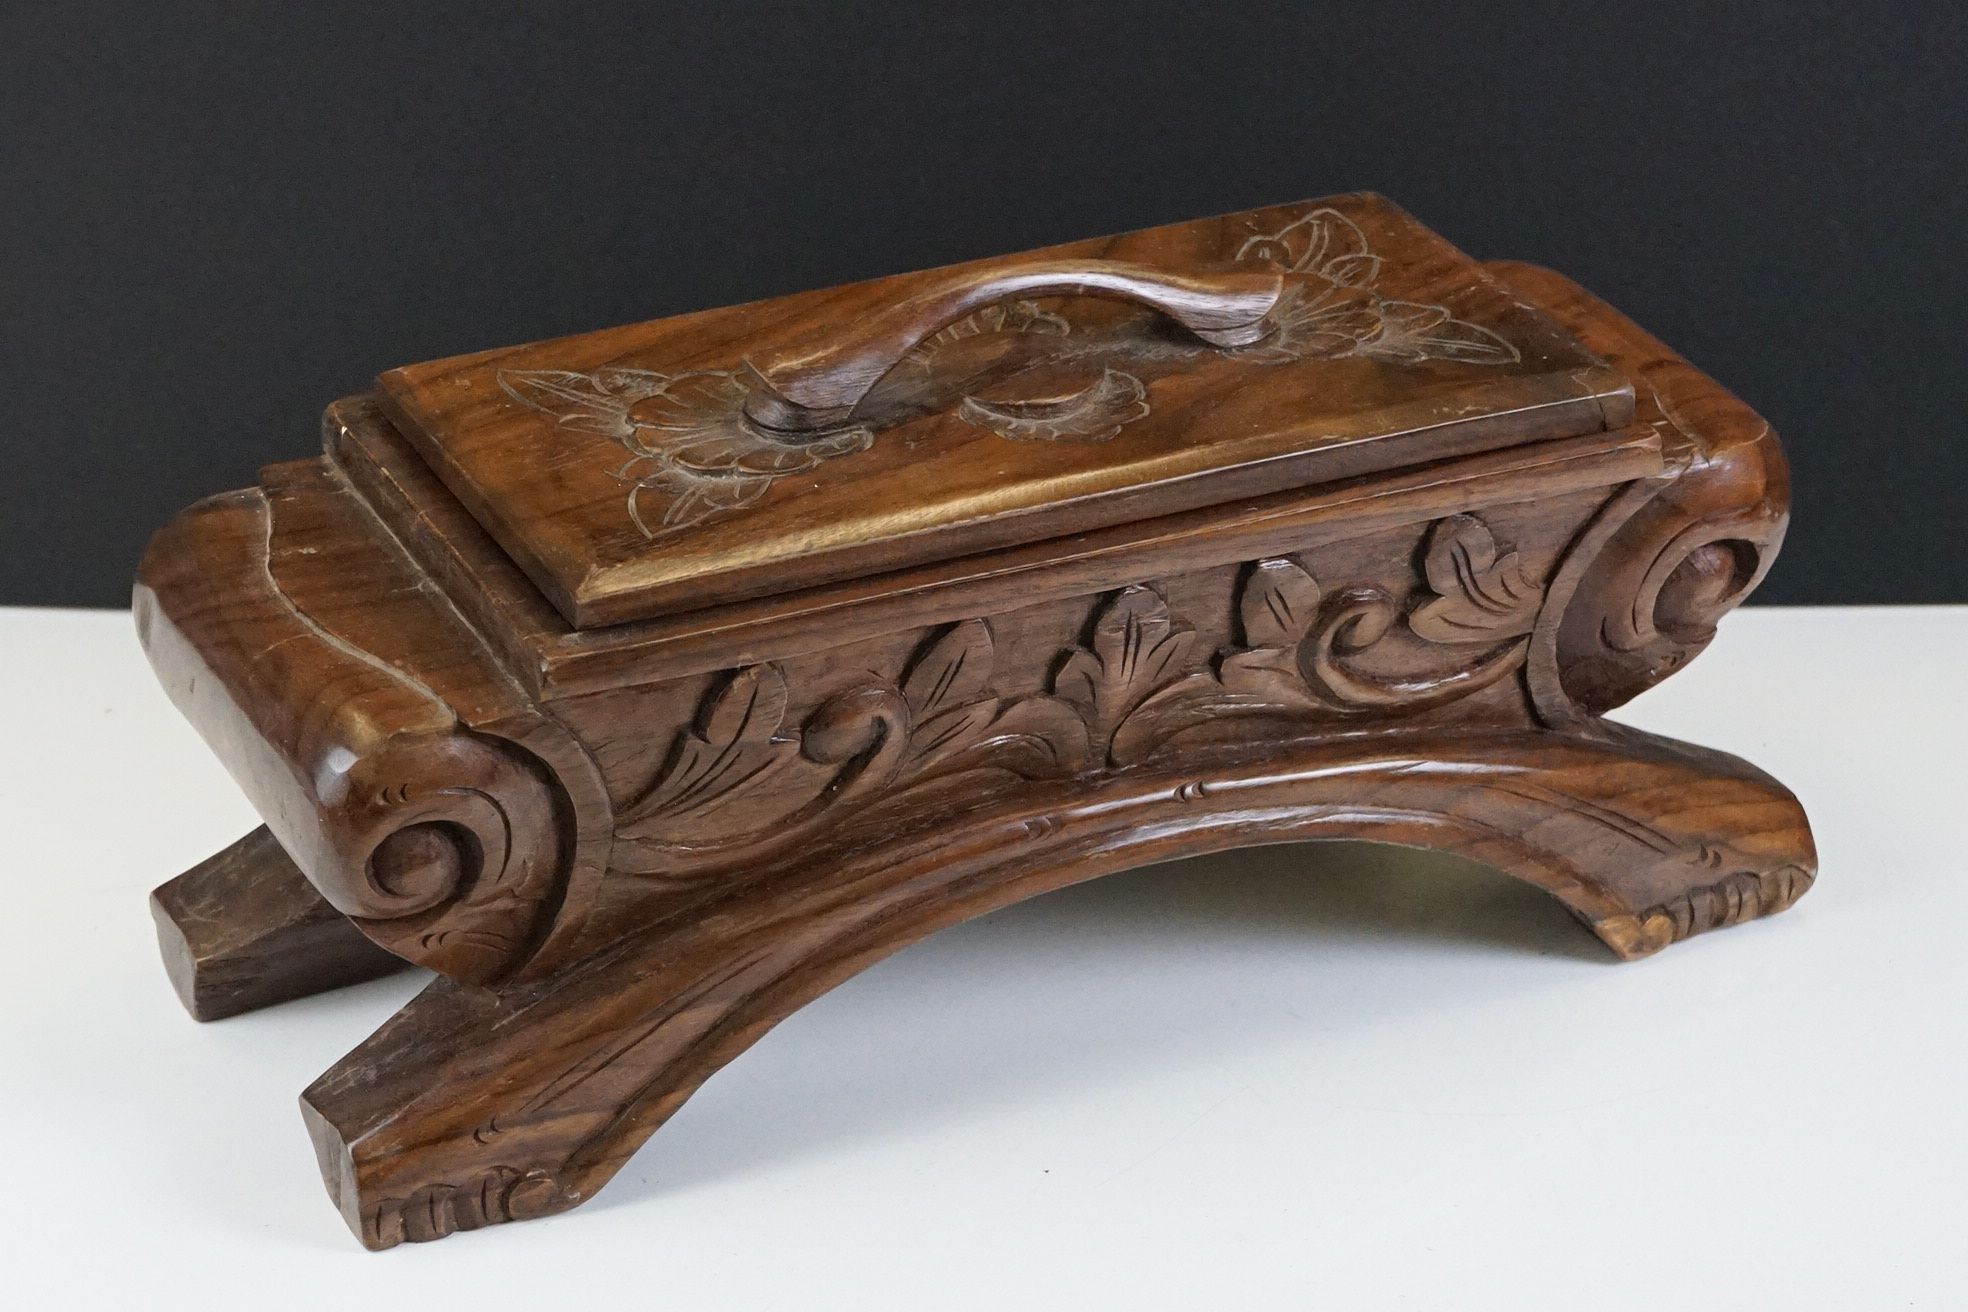 20th Century carved hardwood table-top lidded spice box, with foliate decoration, the lid opening to